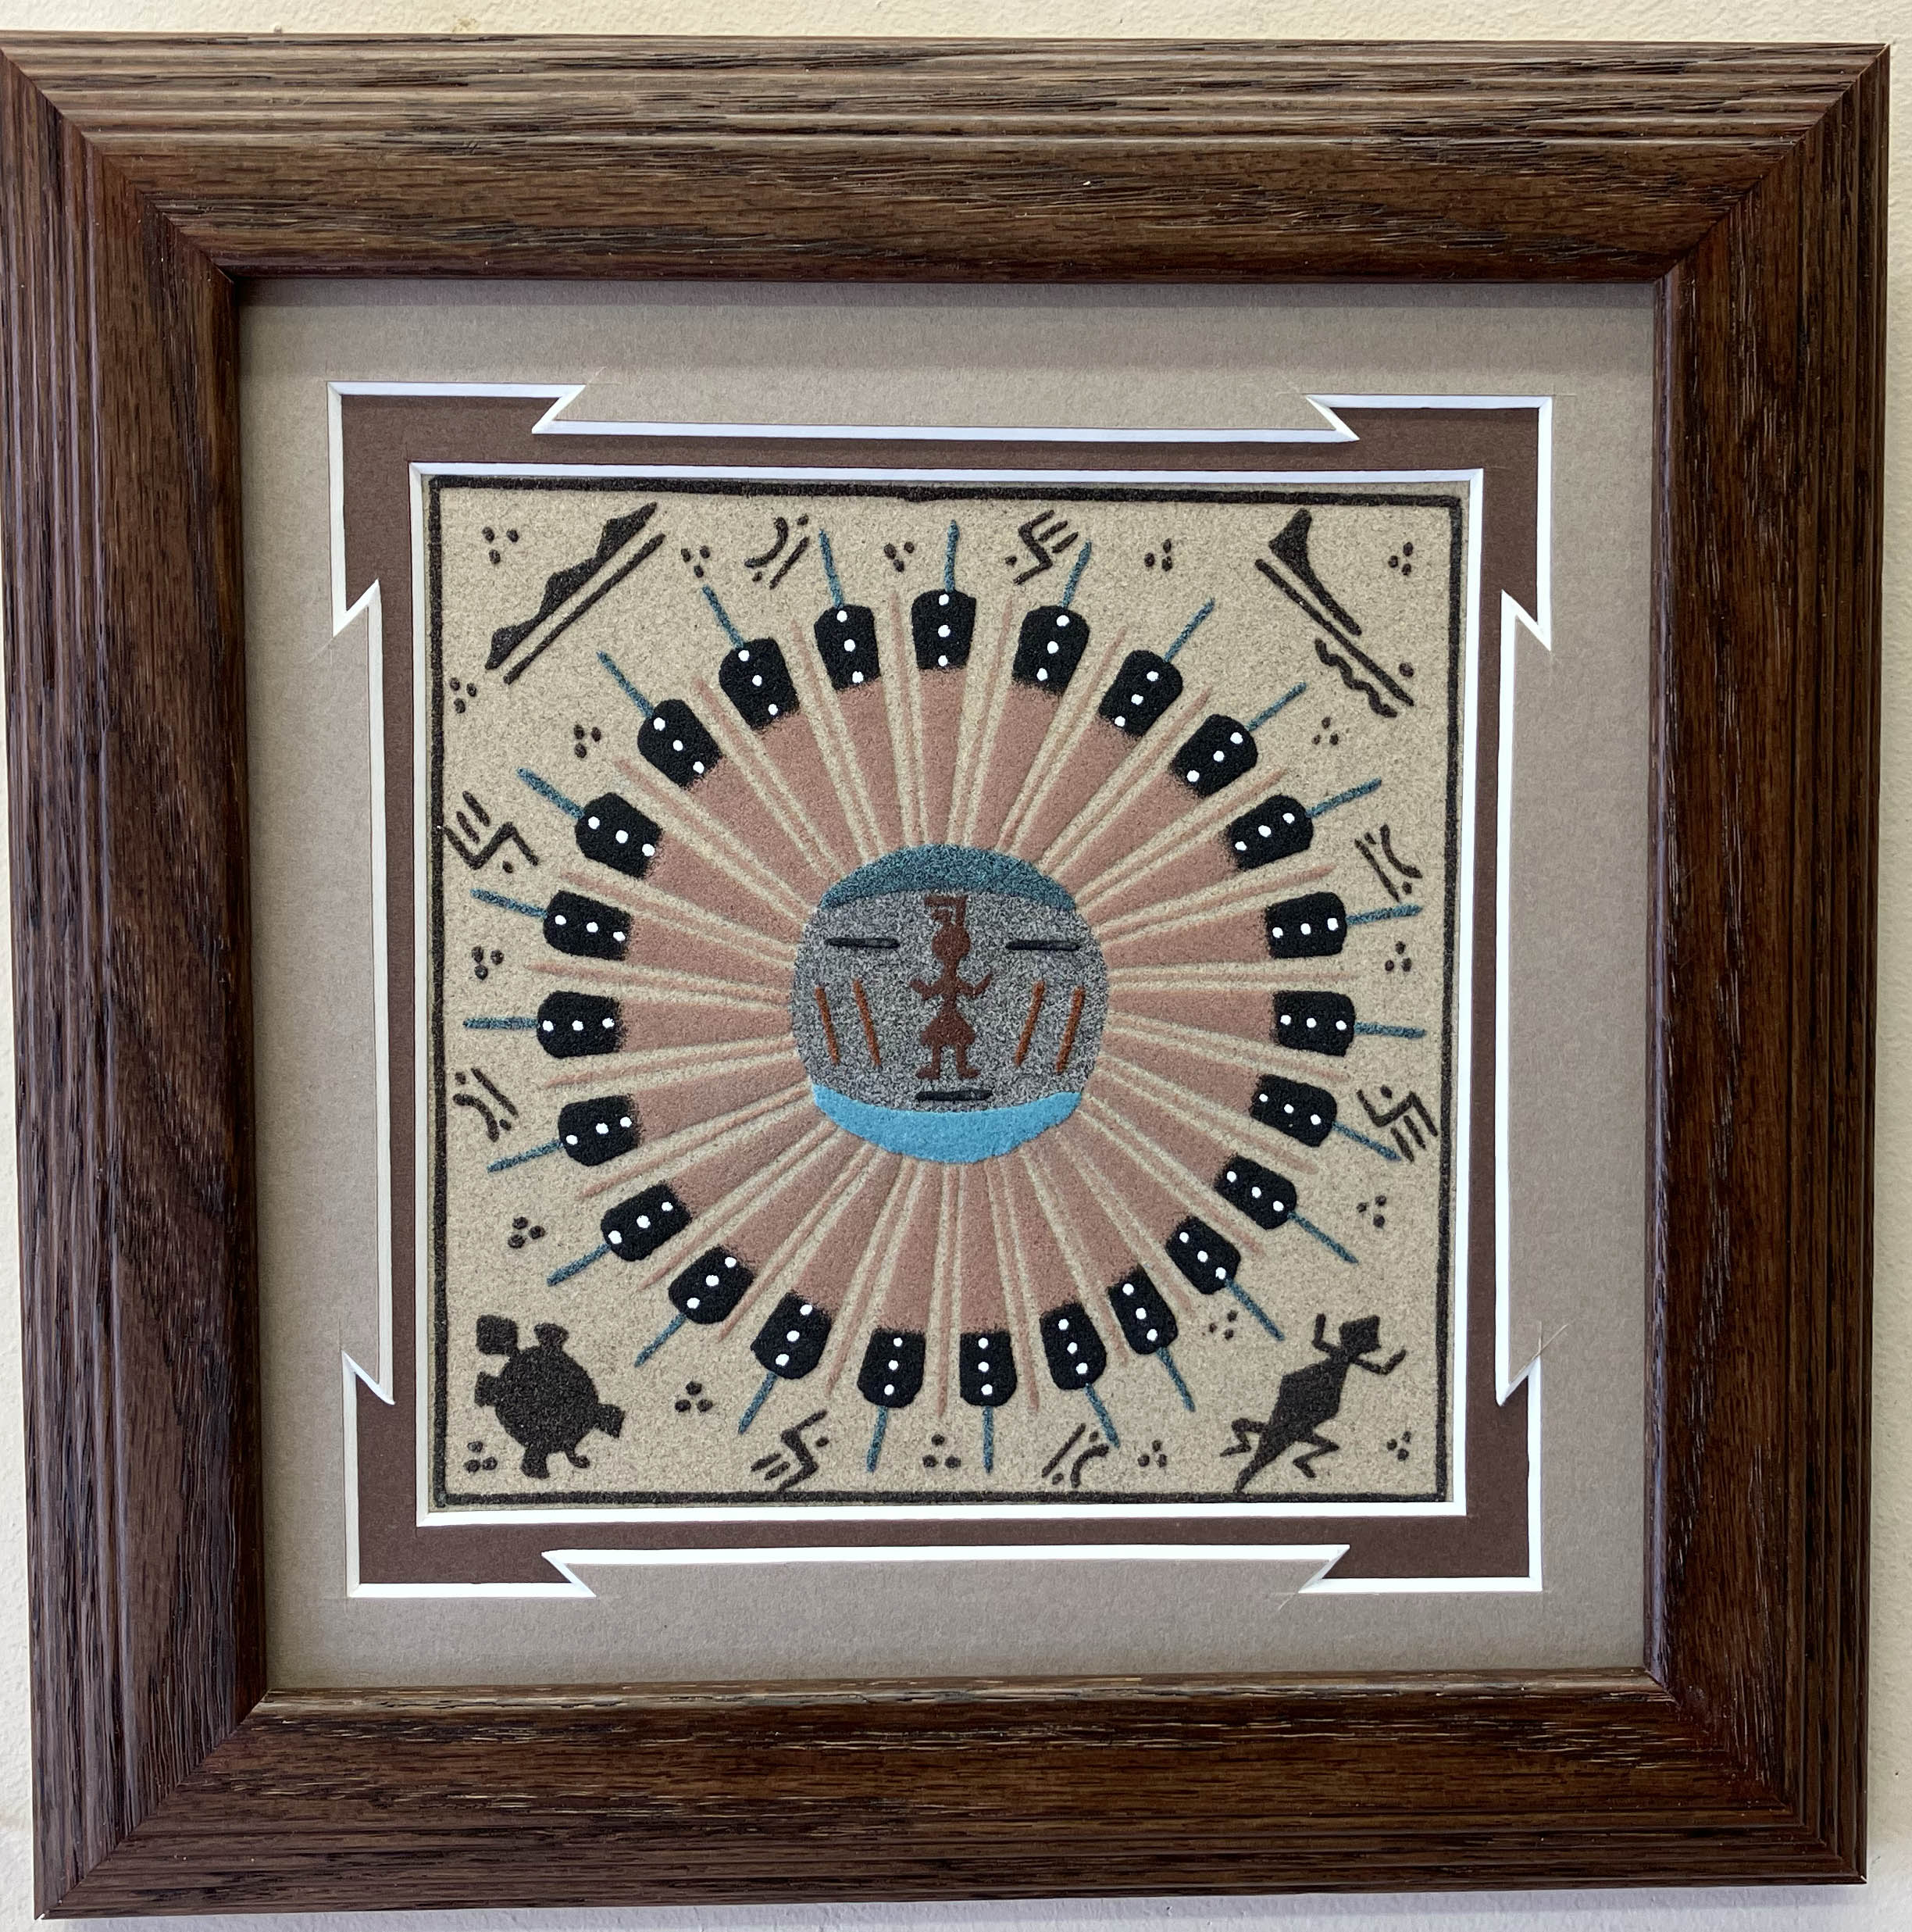 Darlene Johnson | Navajo Sandpainting | Penfield Gallery of Indian Arts | Albuquerque, New Mexico